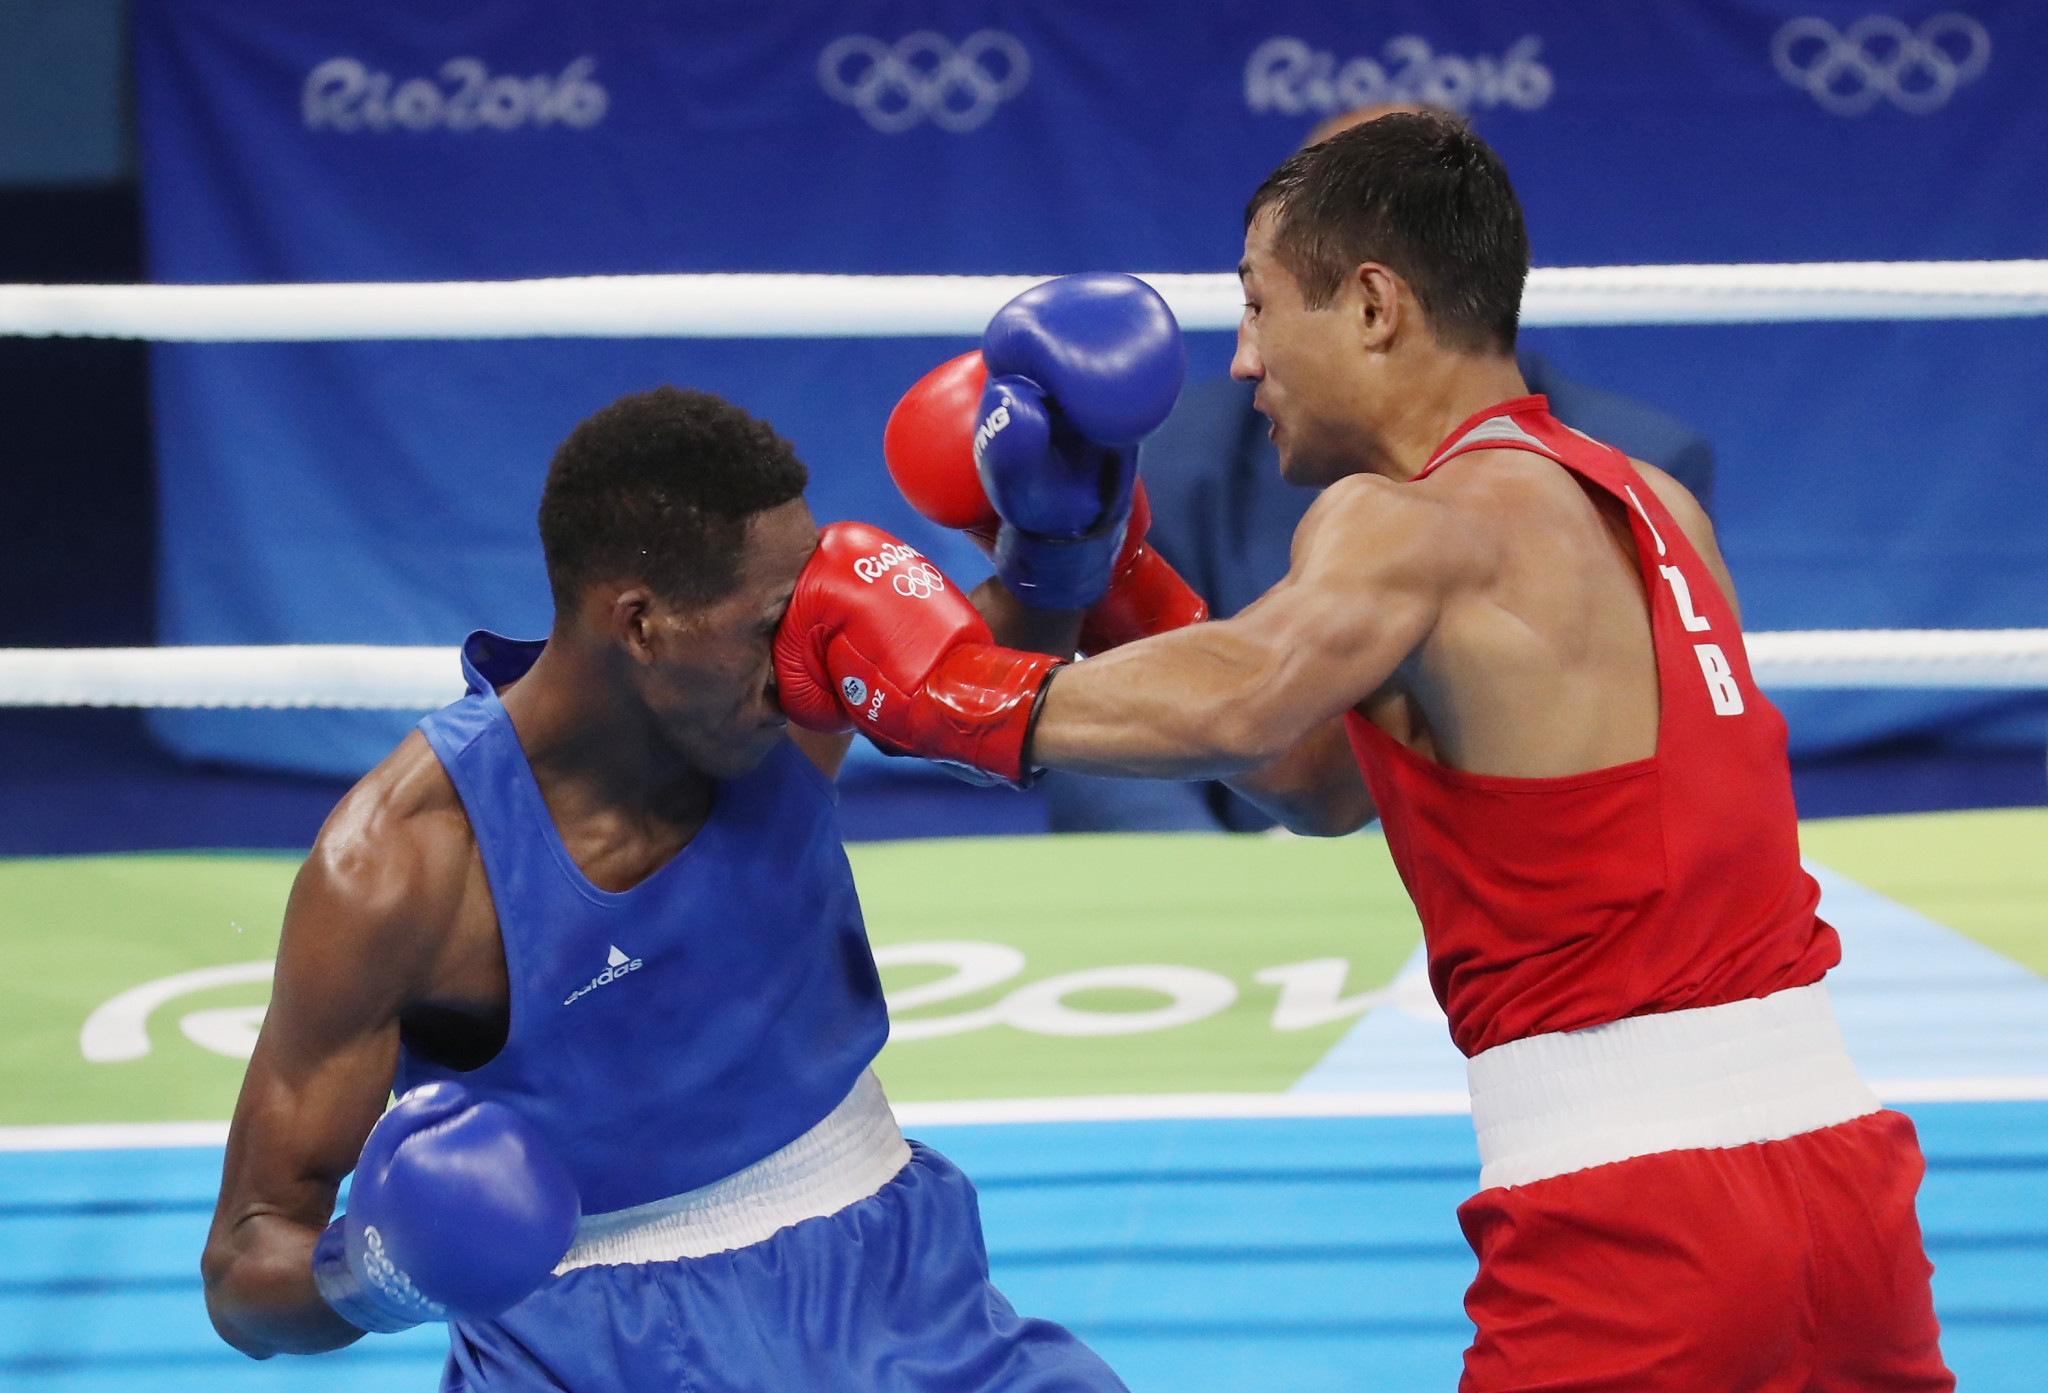 Much uncertainty surrounds the future of boxing at the Olympic Games ©Getty Images